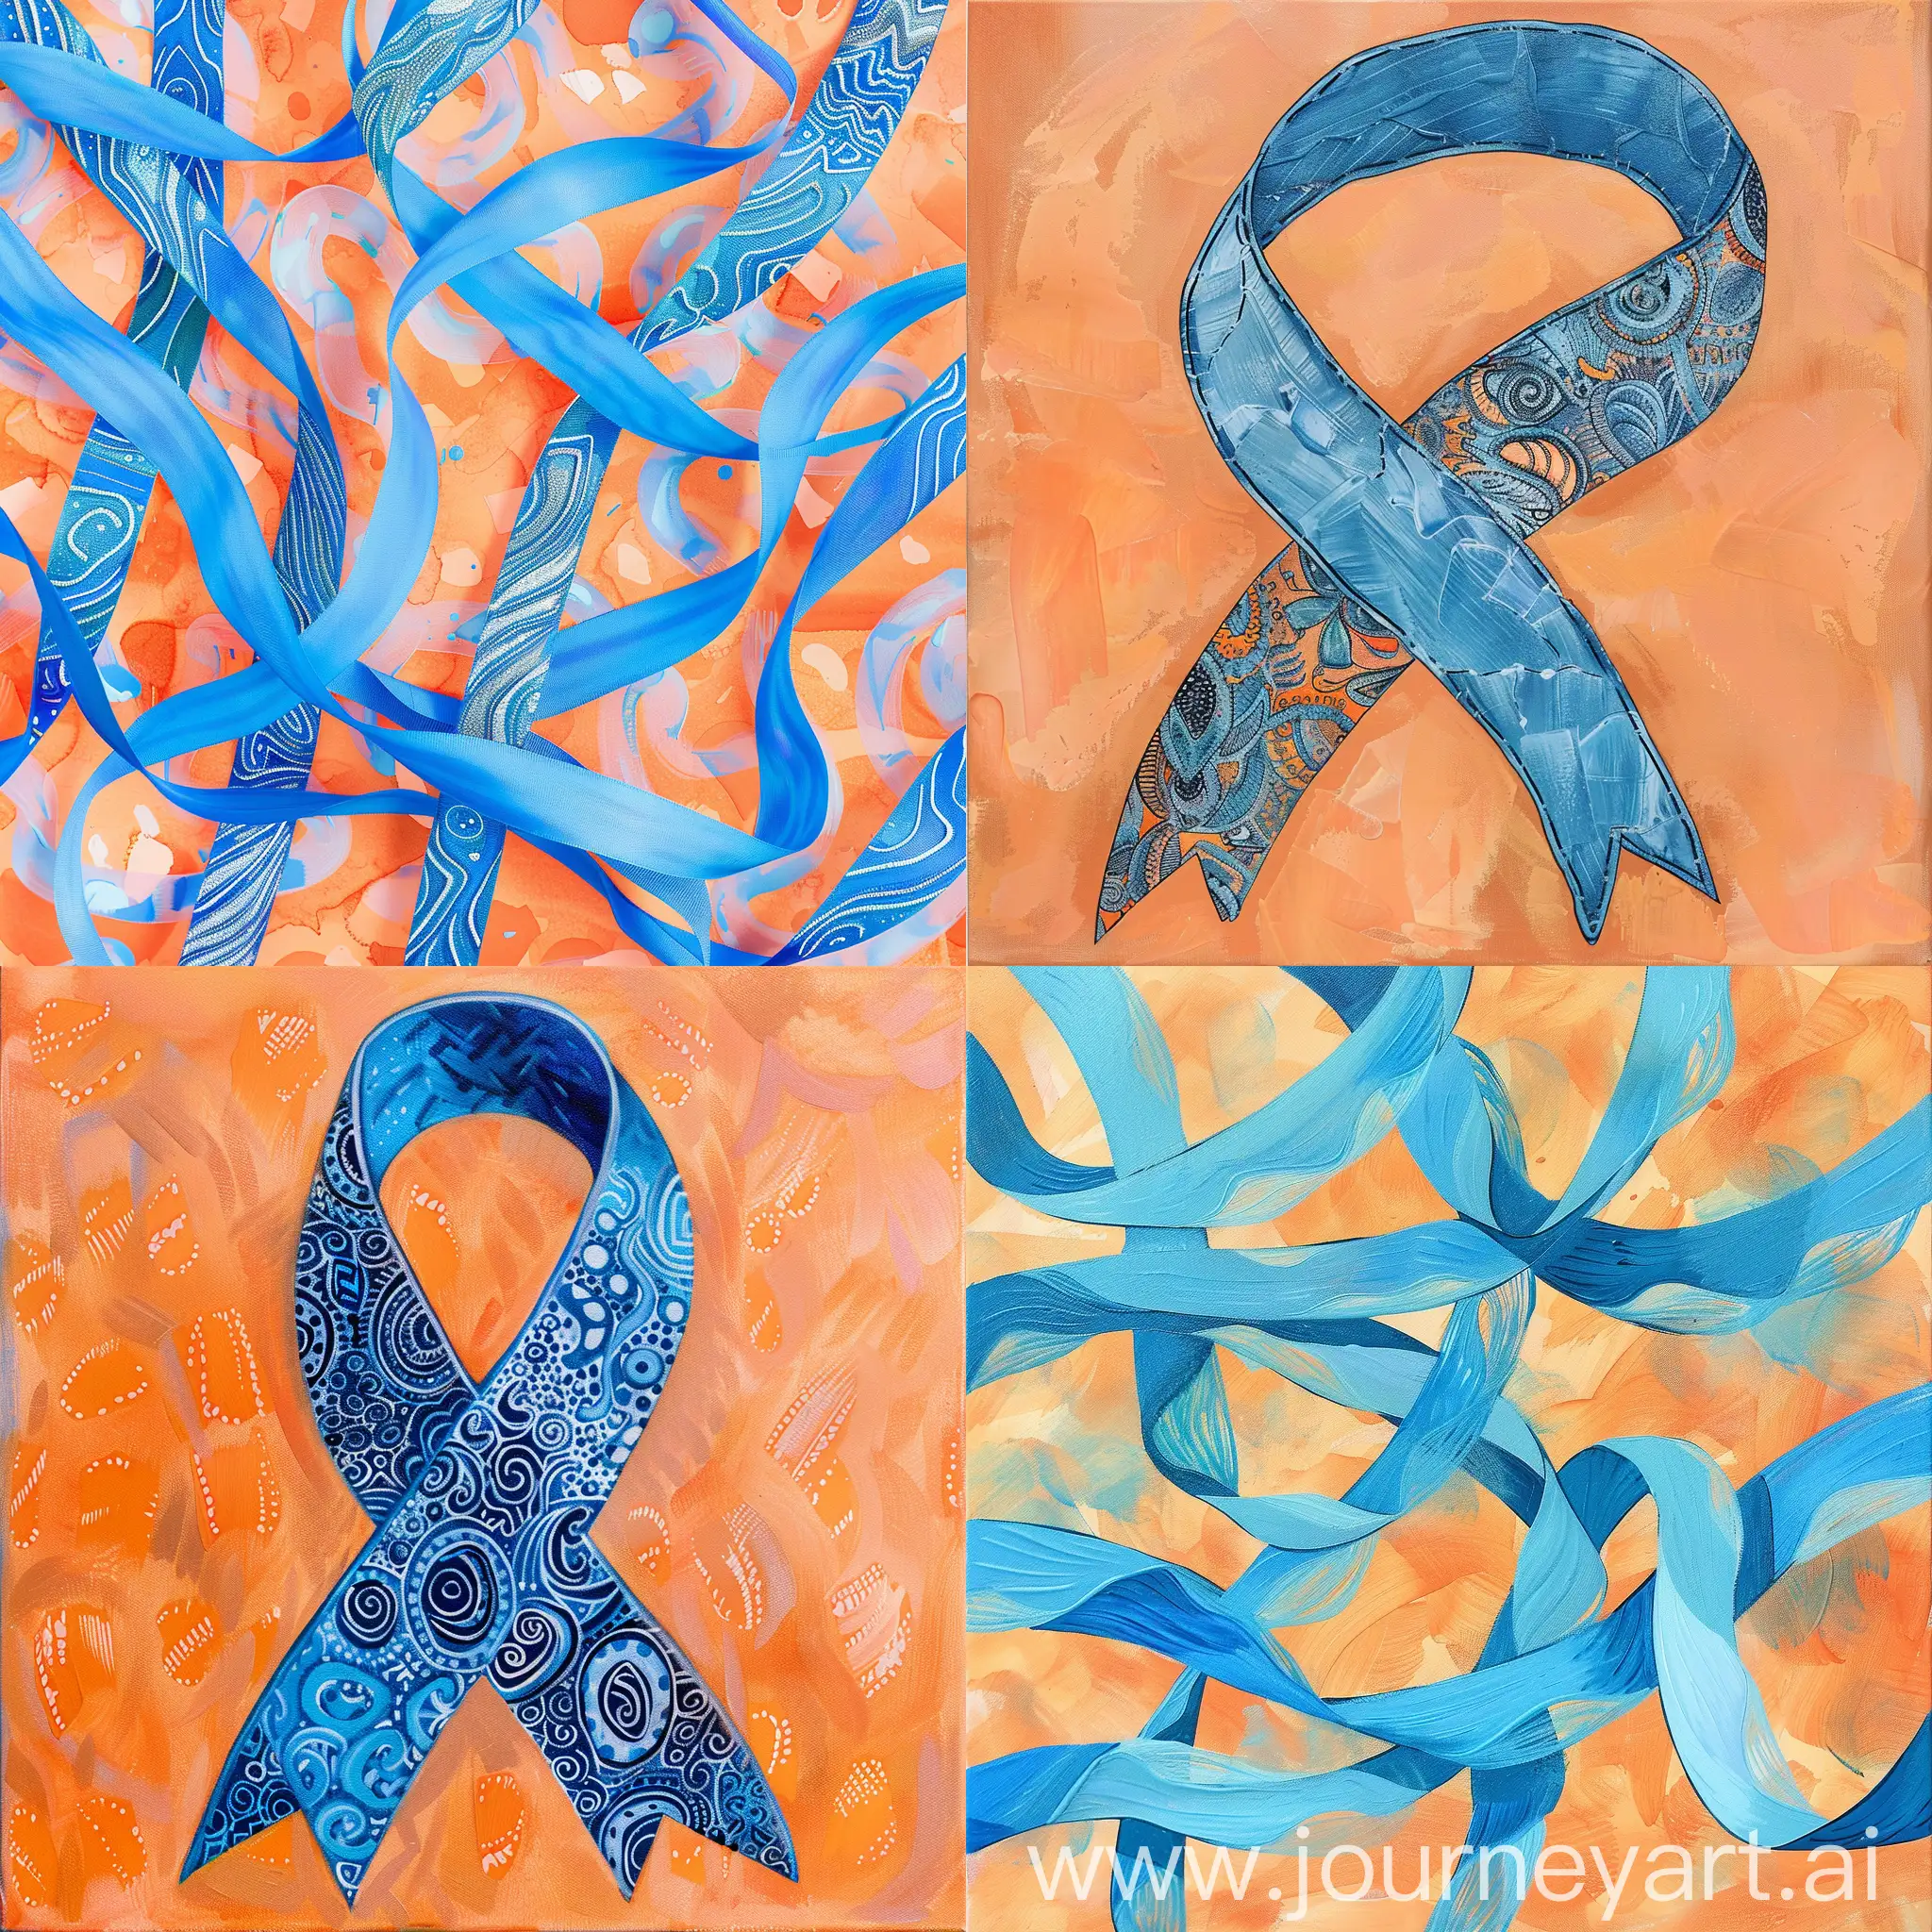 Light blue ribbons with light orange background, all made of paint ,zentangle art style